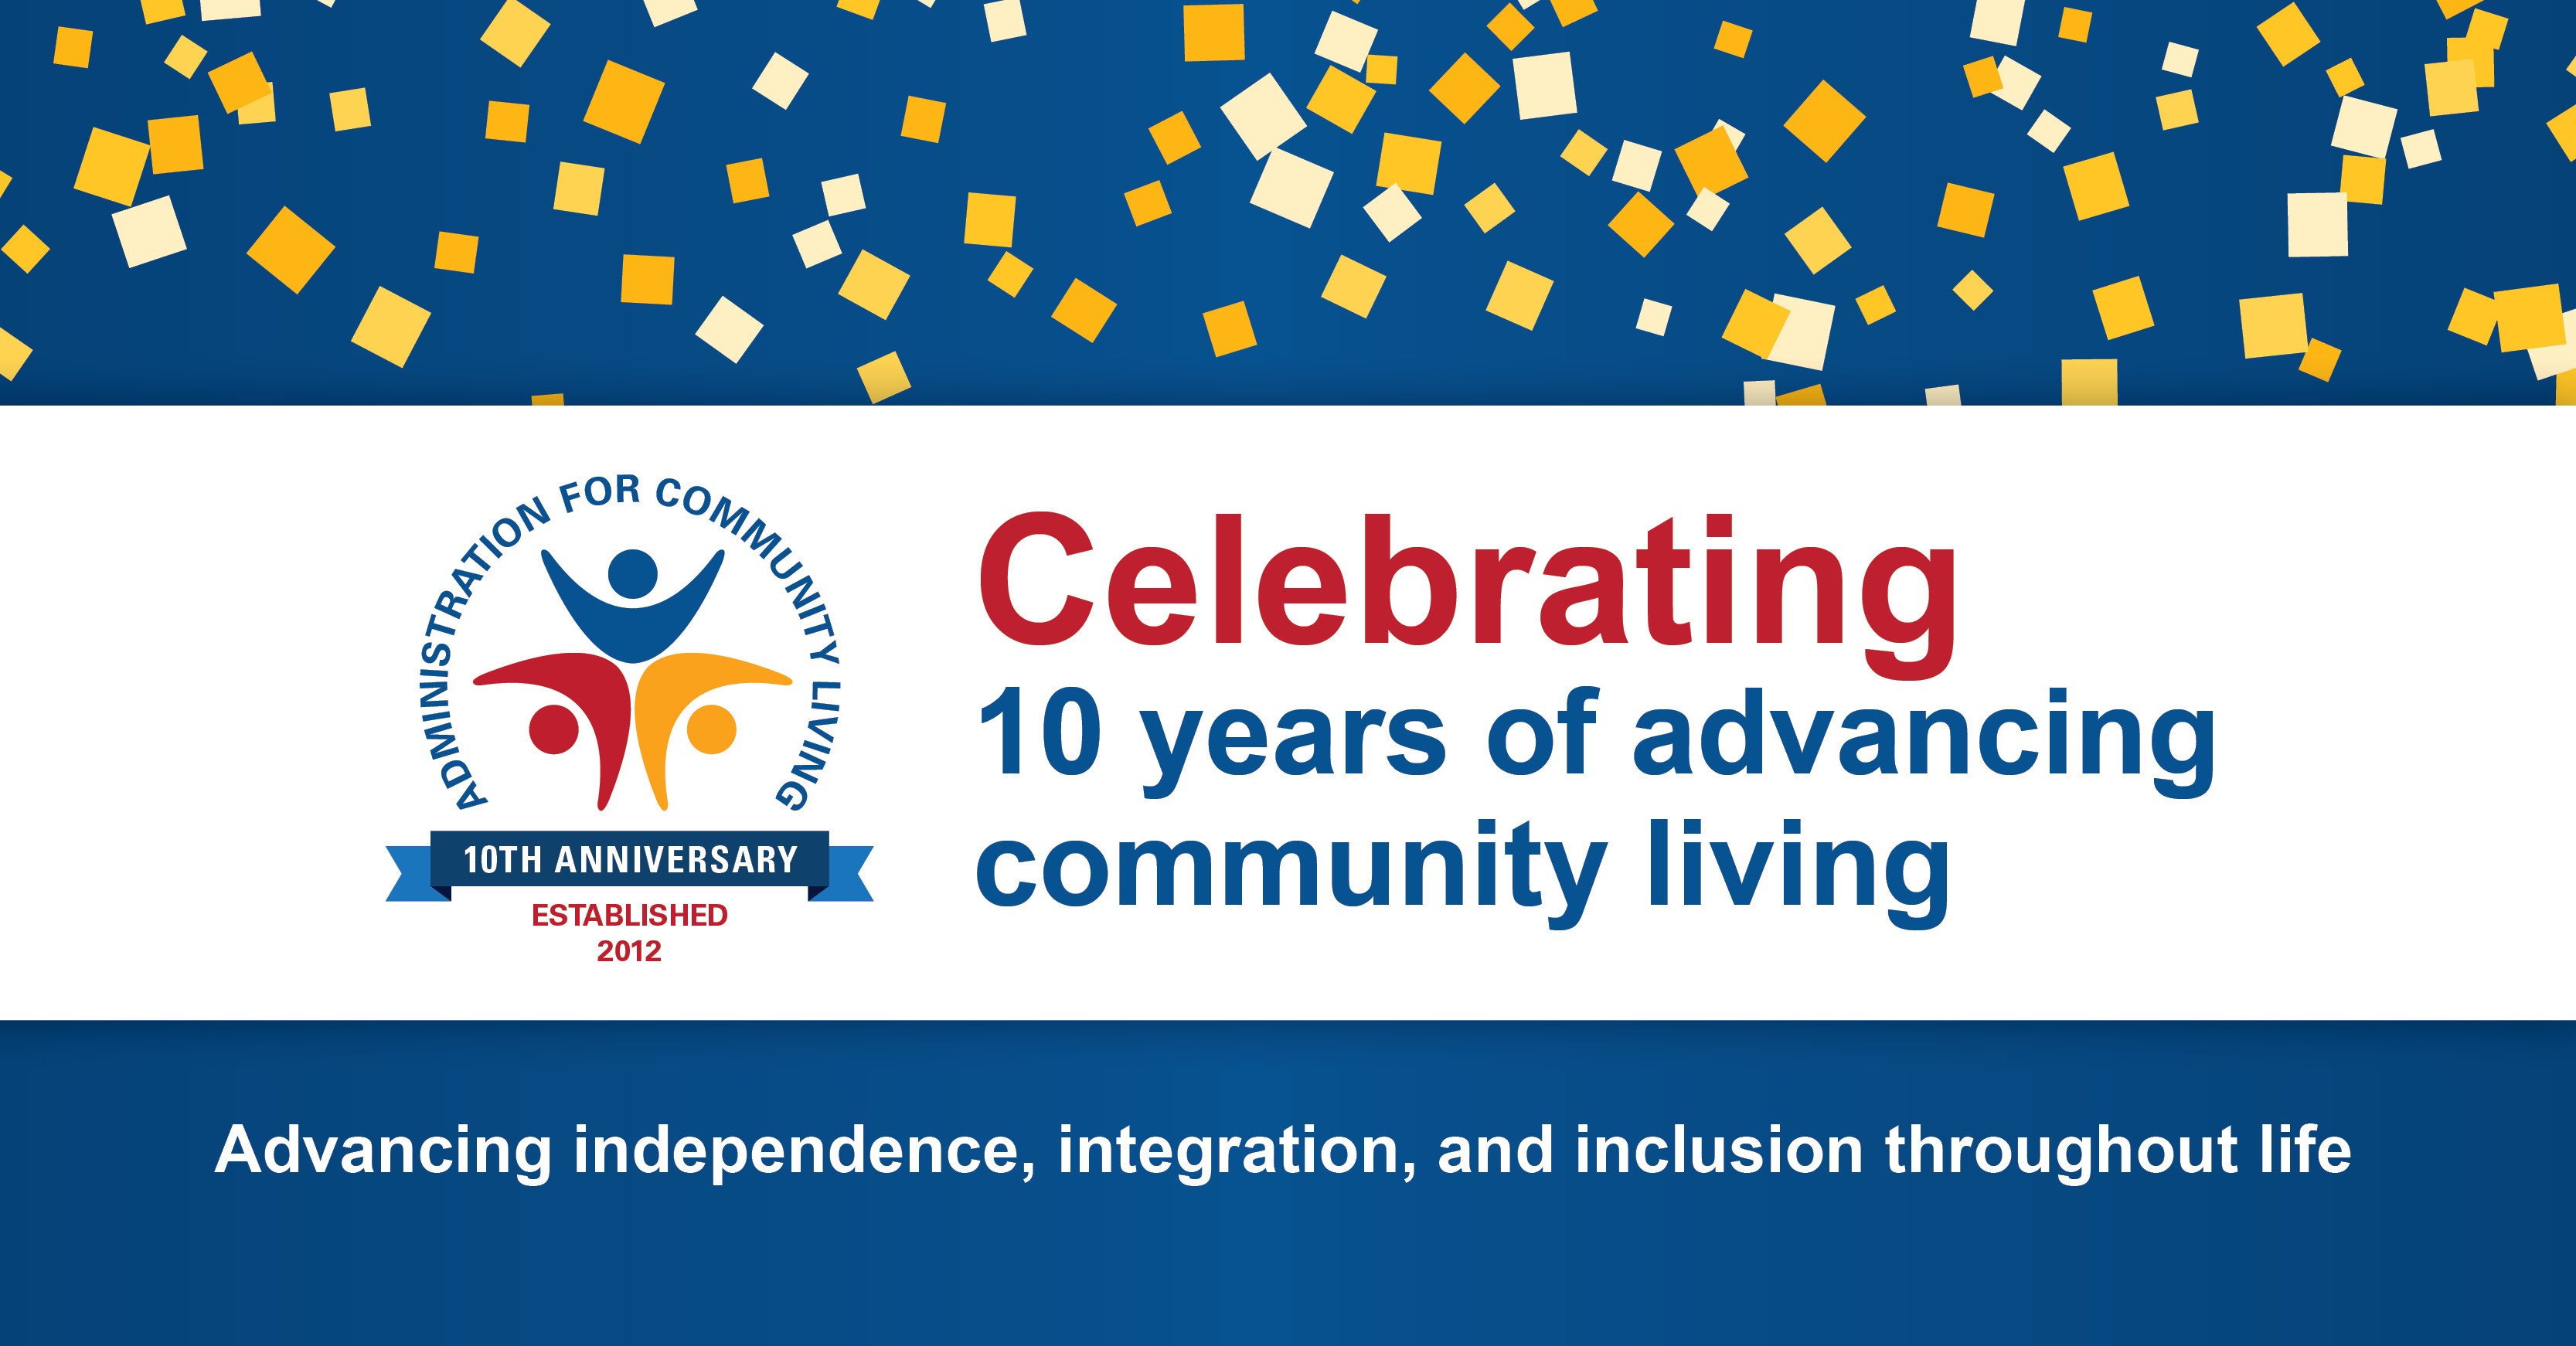 Image with ACL's logo, confetti, and text that says celebrating ten years of community living, with ACL's tagline of "Advancing Independence, Integration and Inclusion" across the bottom